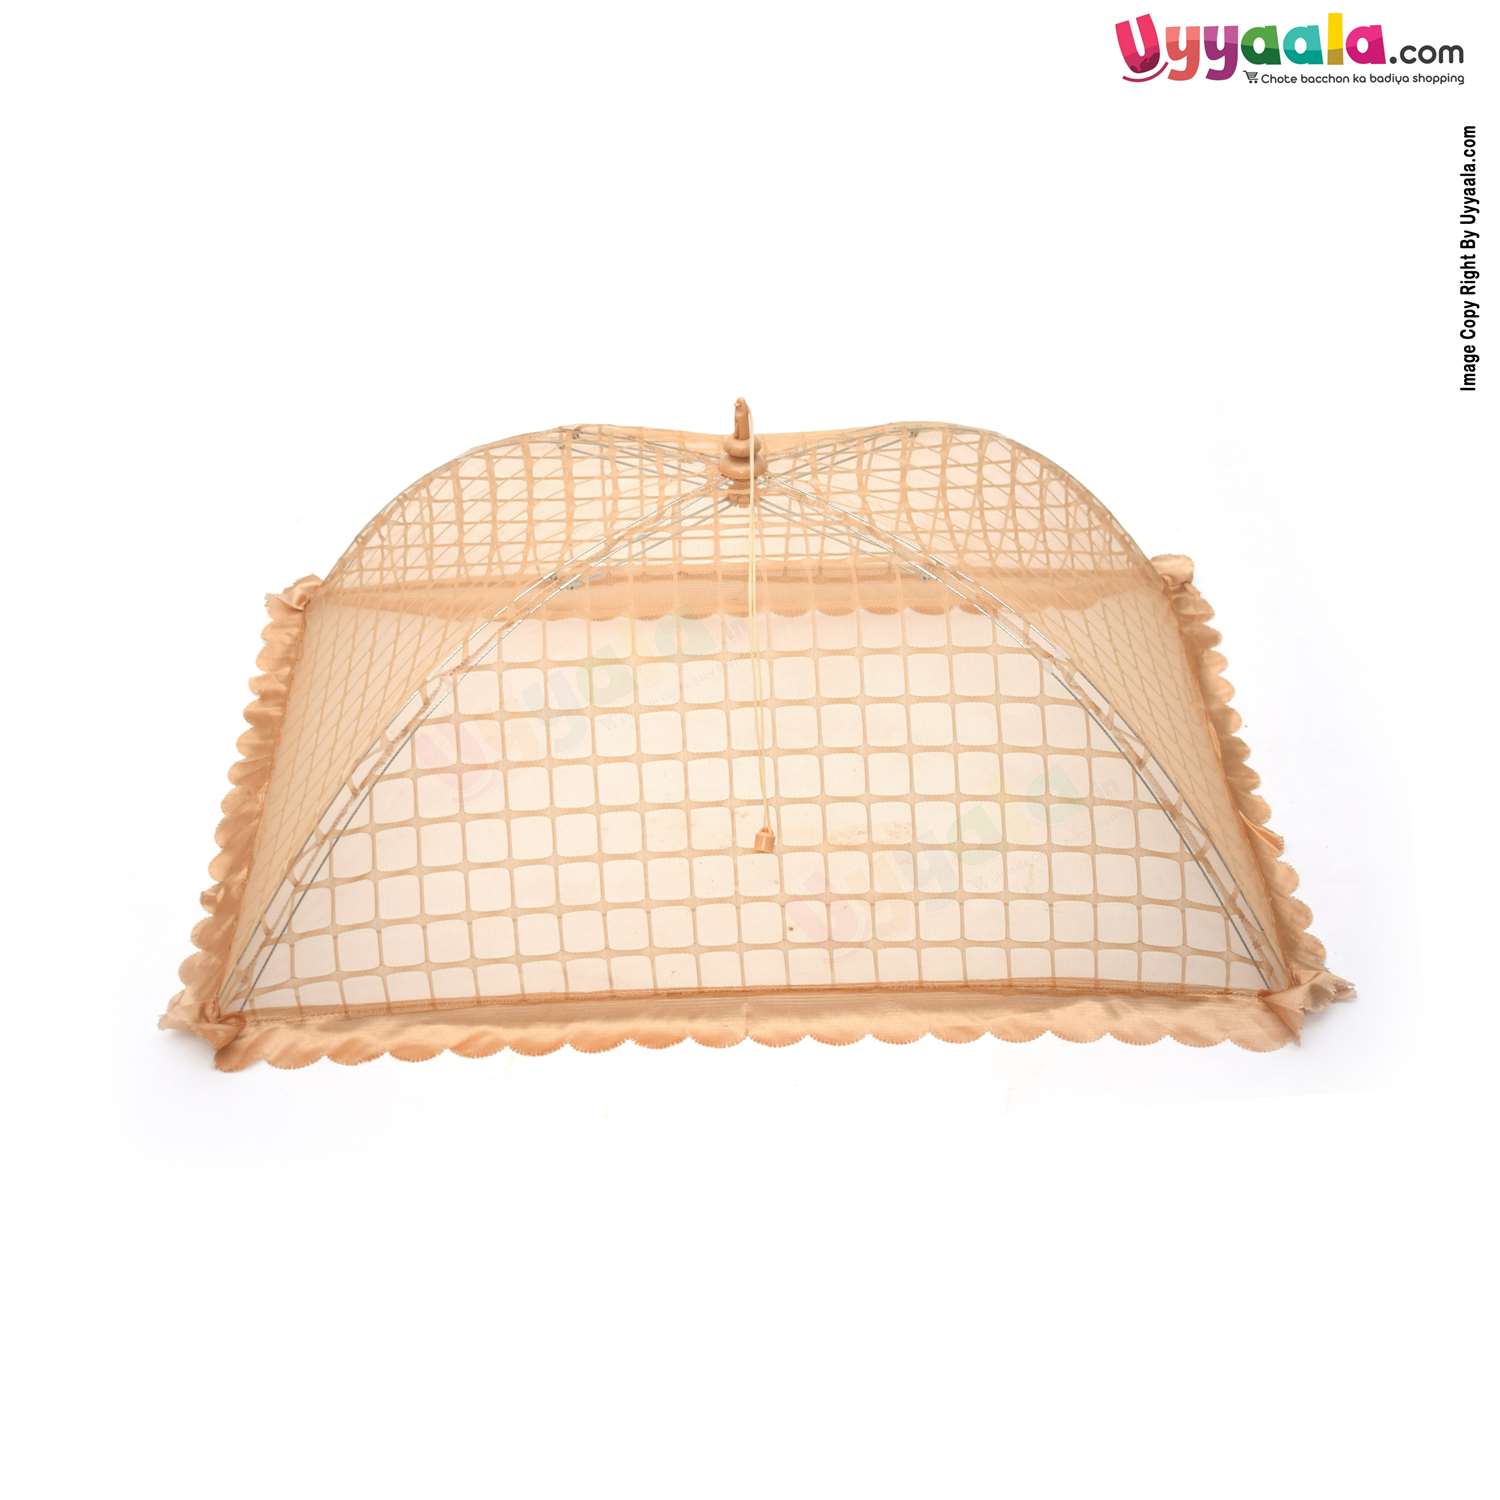 Mosquito Net For Babies, Square - Brown